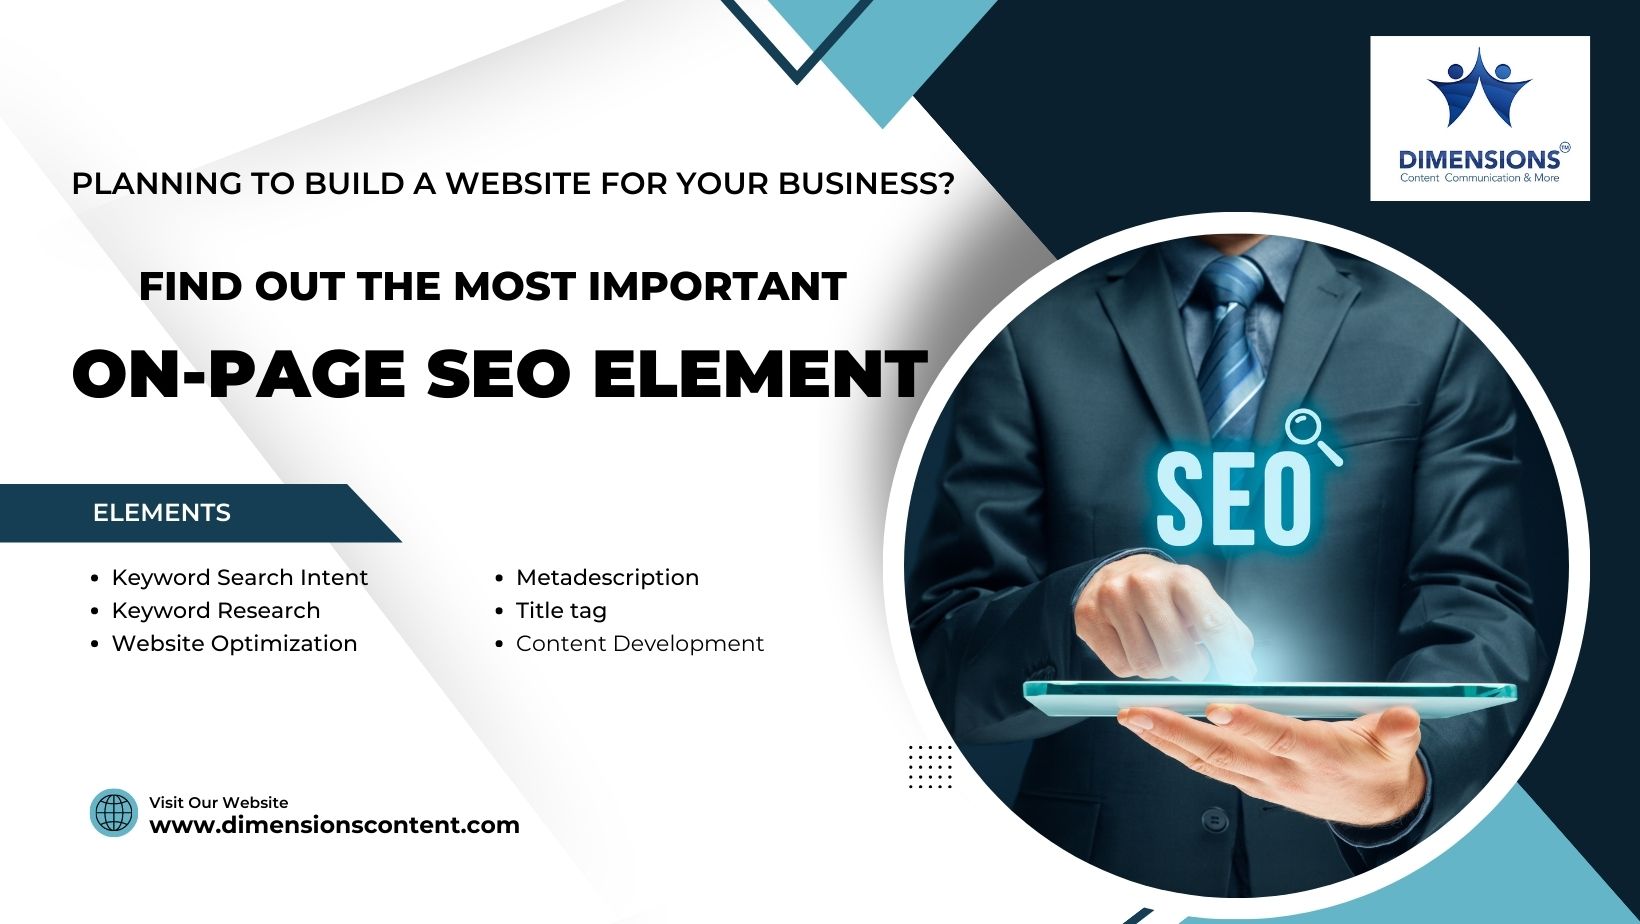 On-page SEO element